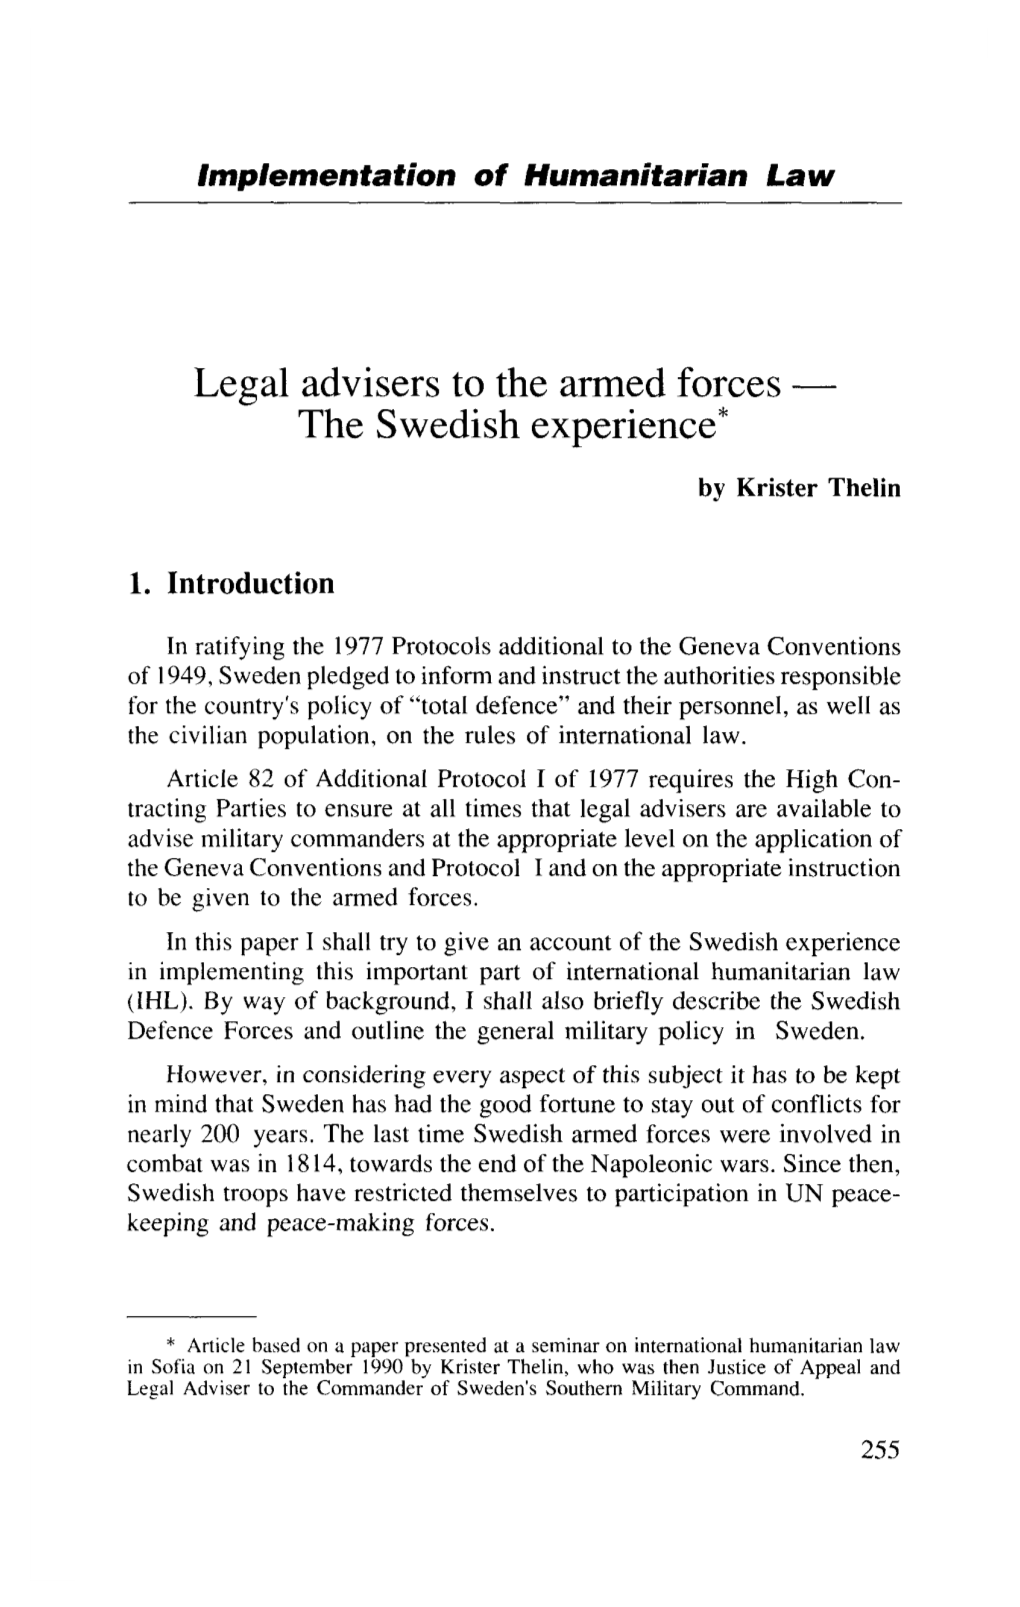 Legal Advisers to the Armed Forces the Swedish Experience*